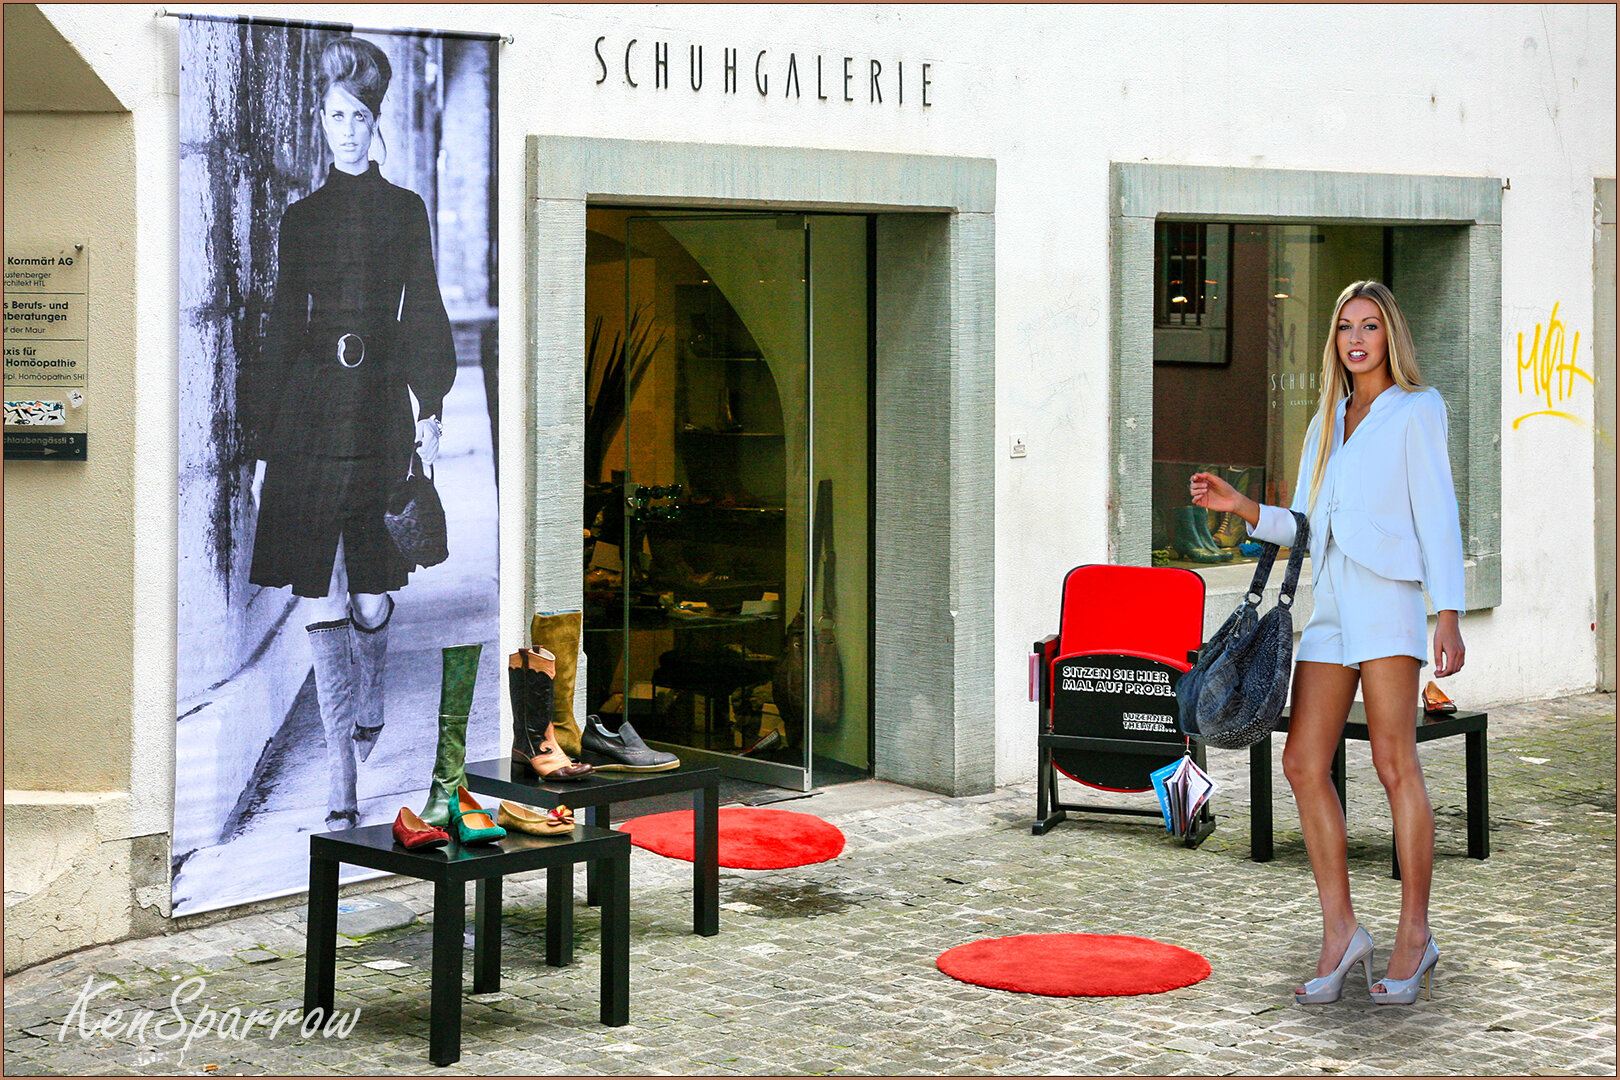 362  Ellie at the Schuhgalerie